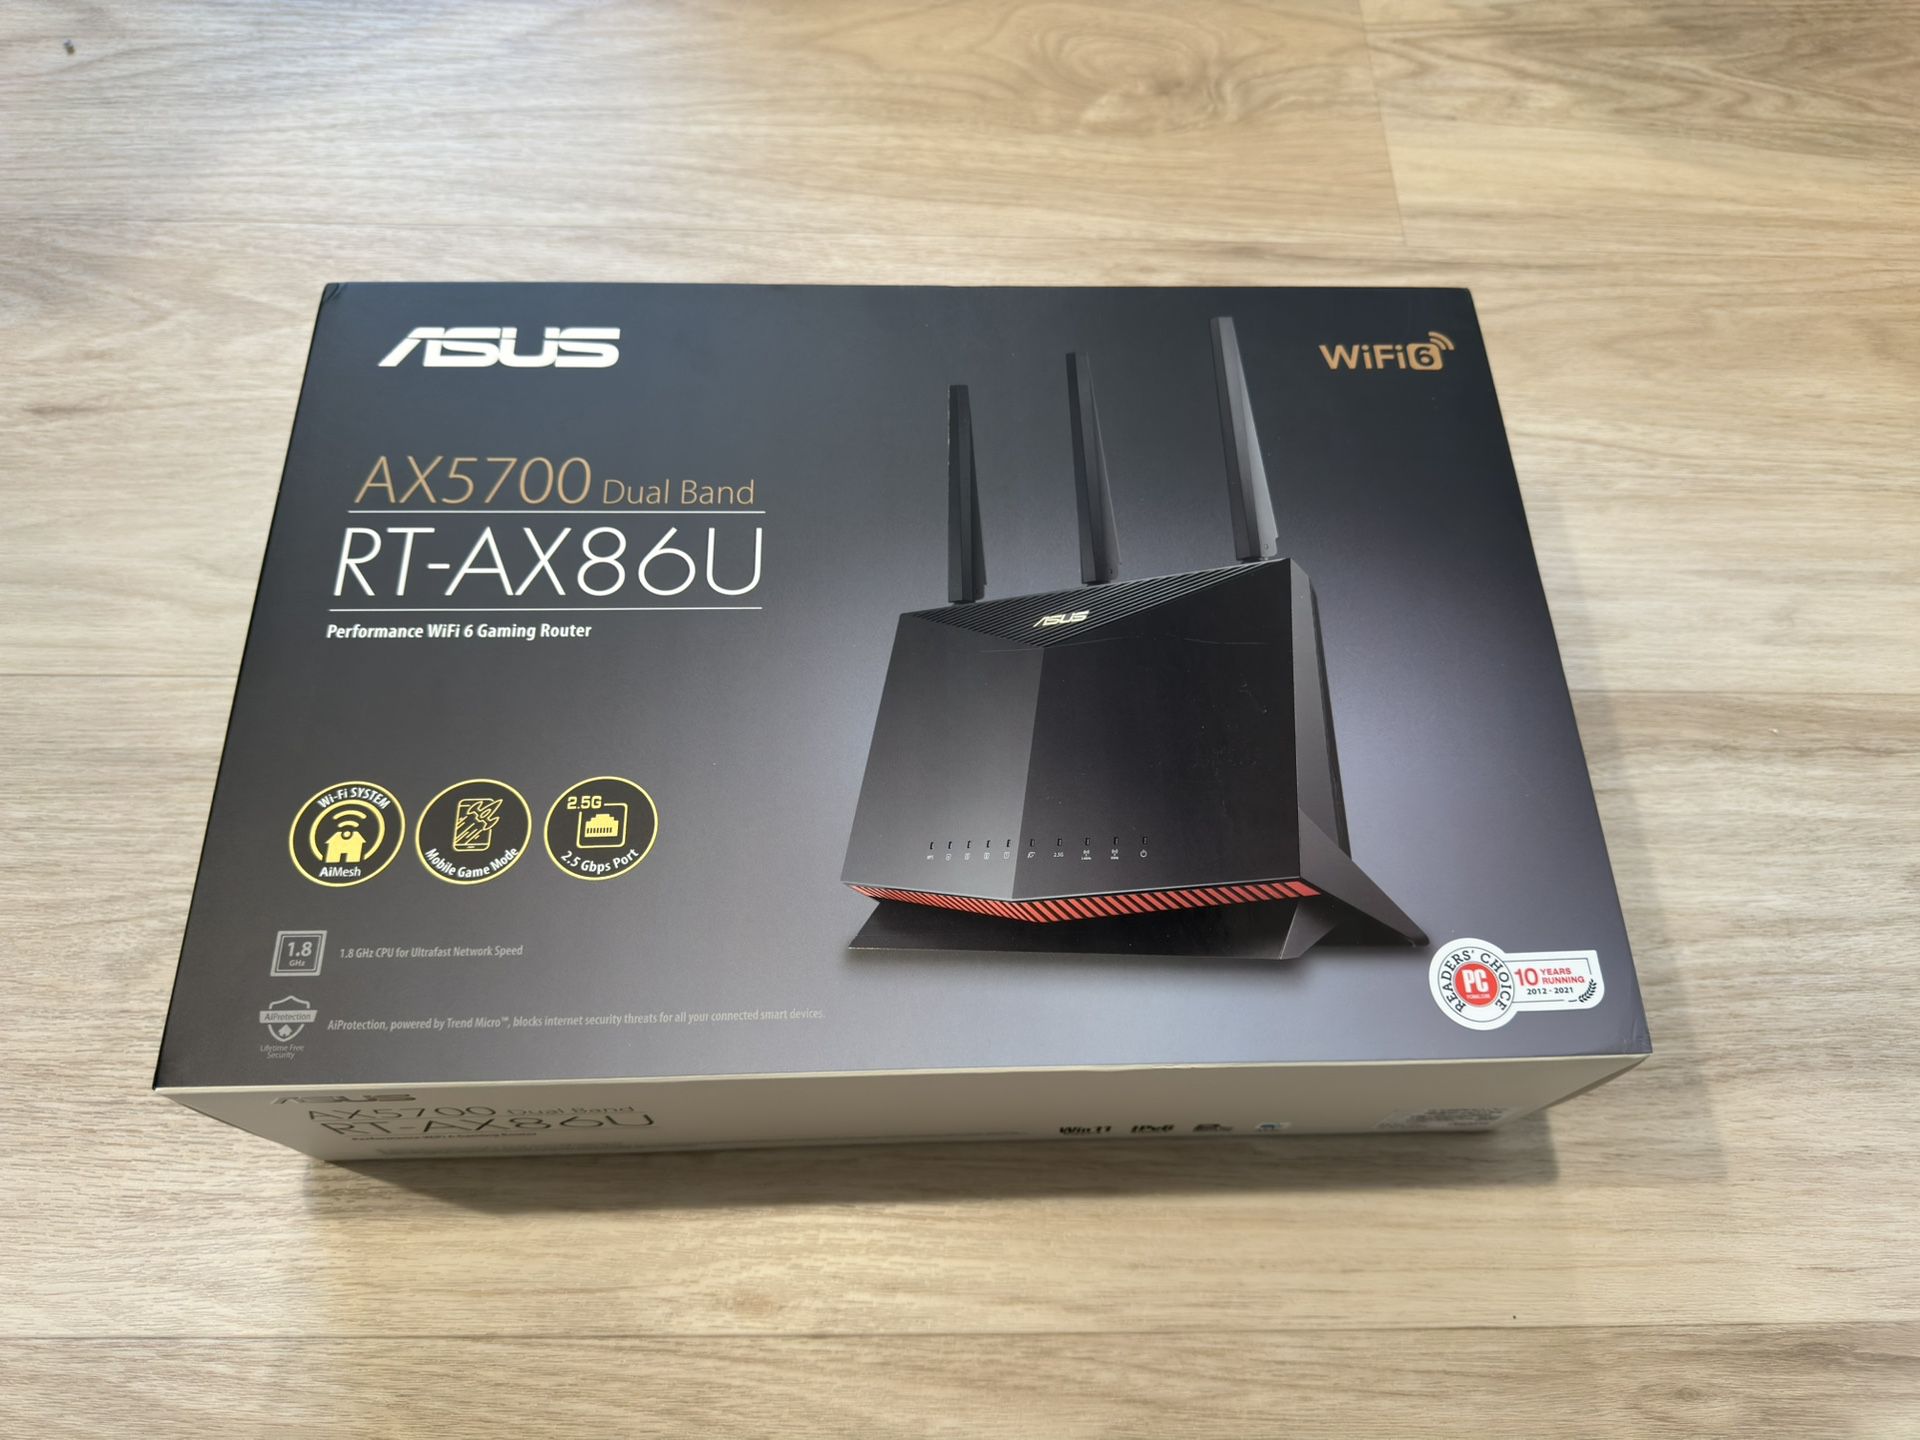 ASUS RT-AX86U WiFi 6 AX5700 Dual Band Router